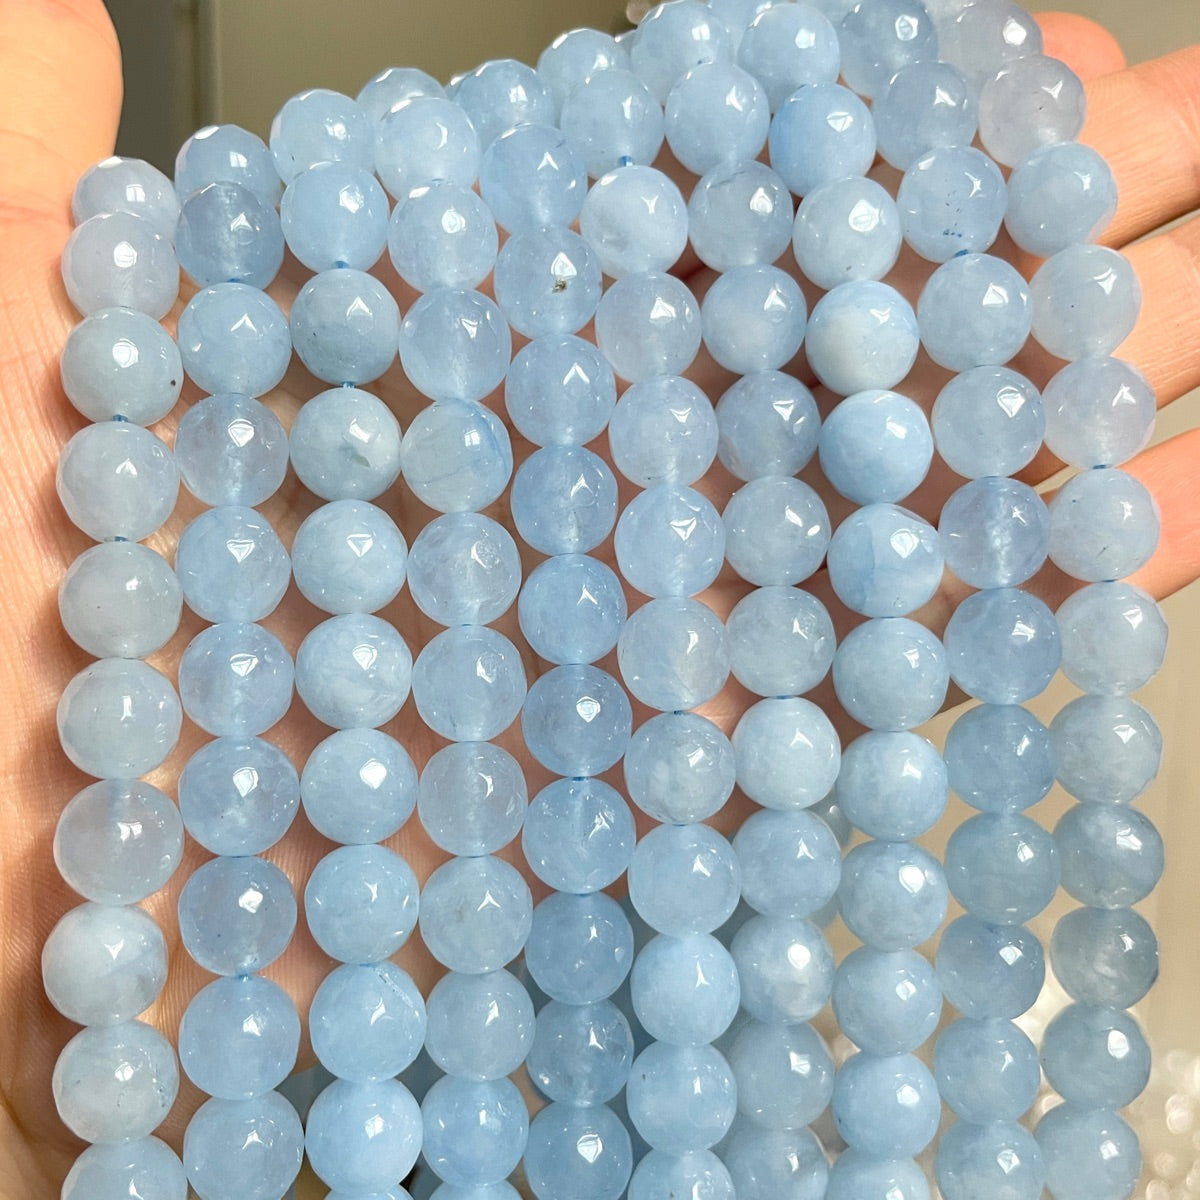 2 Strands/lot 10mm Light Blue Faceted Jade Stone Beads Stone Beads Faceted Jade Beads New Beads Arrivals Charms Beads Beyond